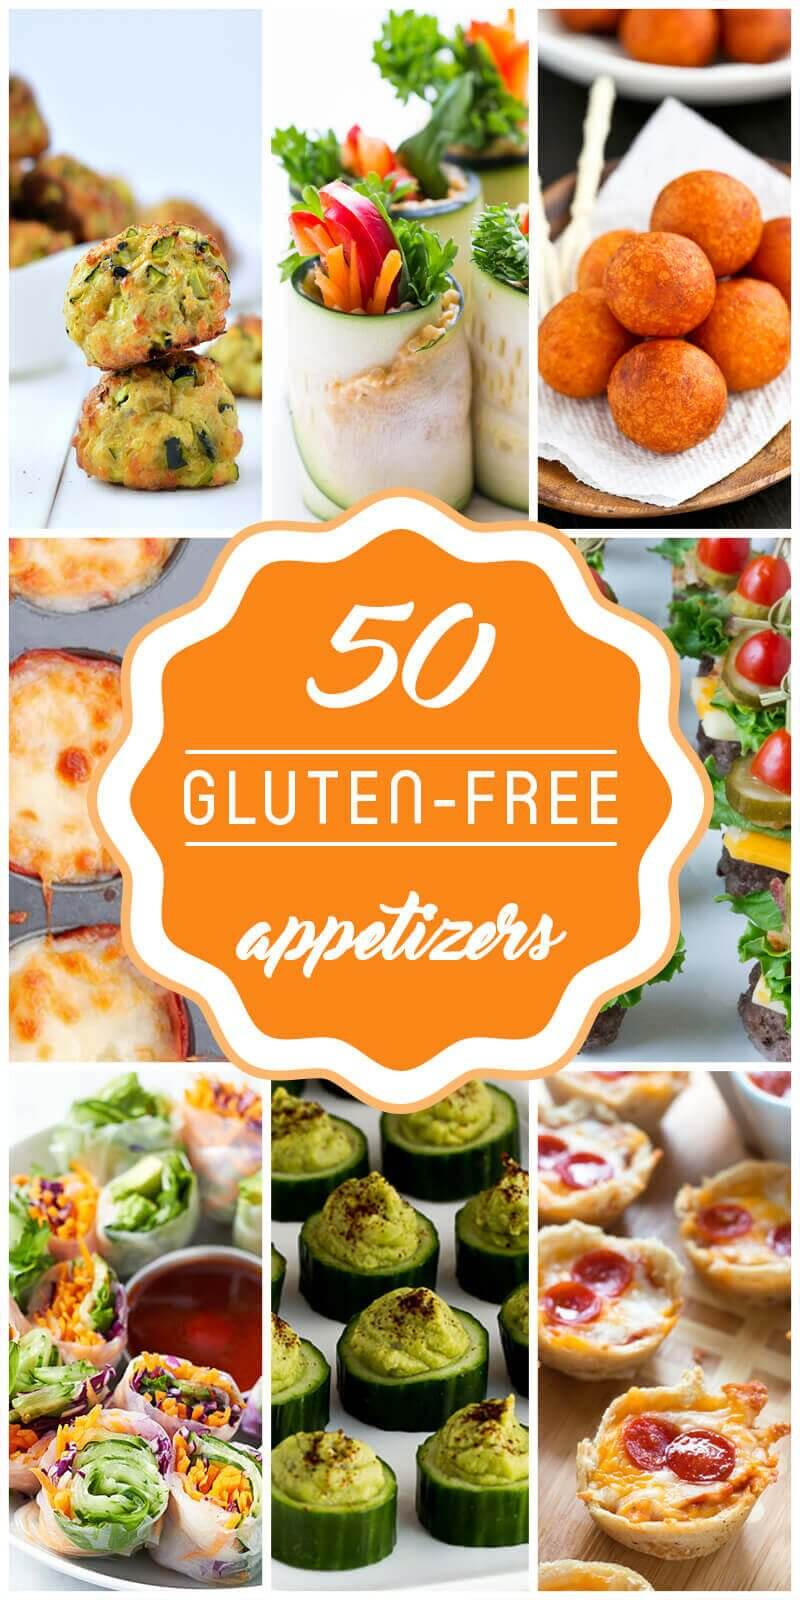 Gluten Free Appetizers For Parties
 50 Best Gluten Free Appetizer Recipes to Serve for Your